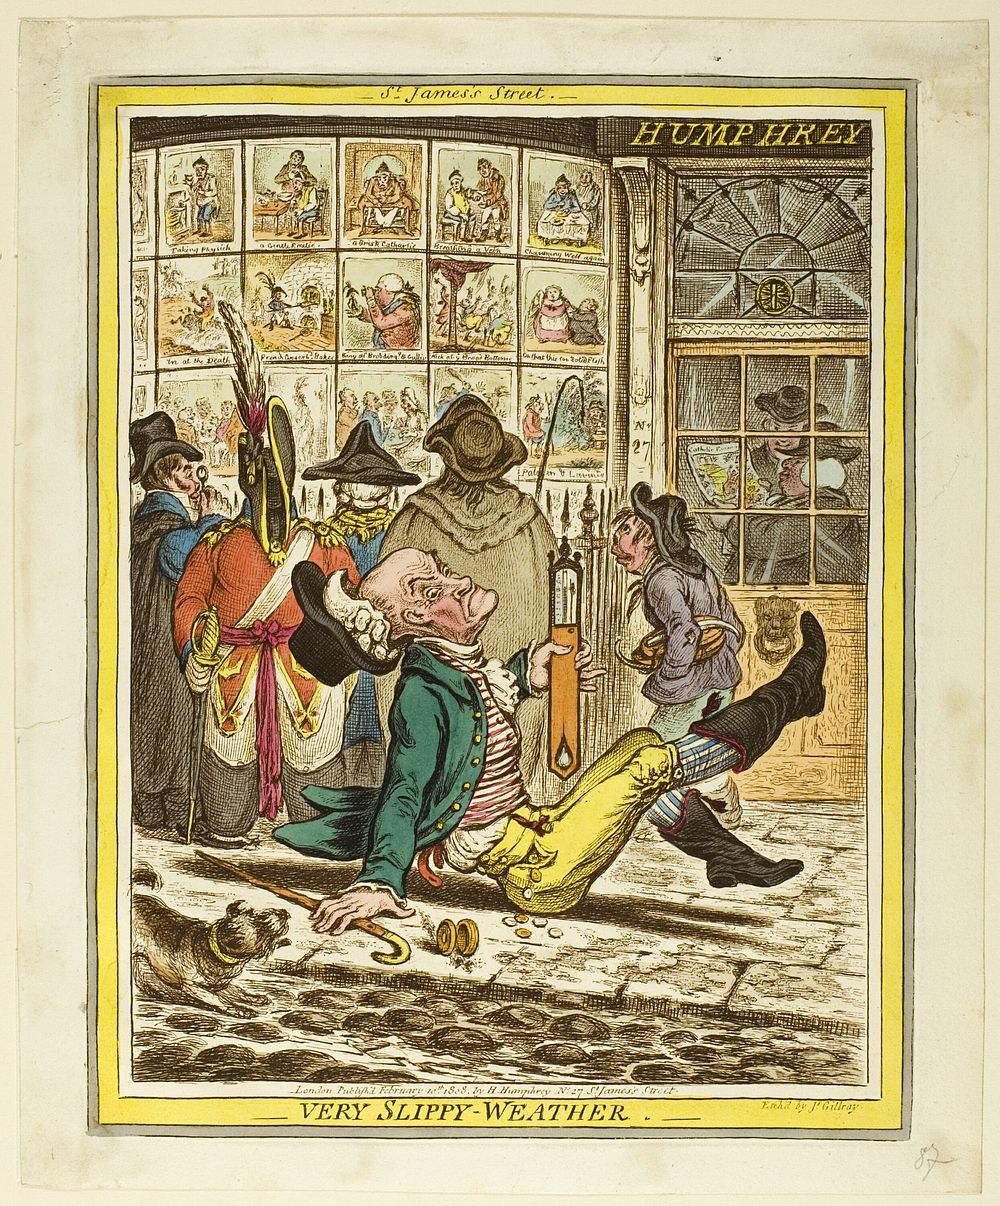 Very Slippery Weather by James Gillray